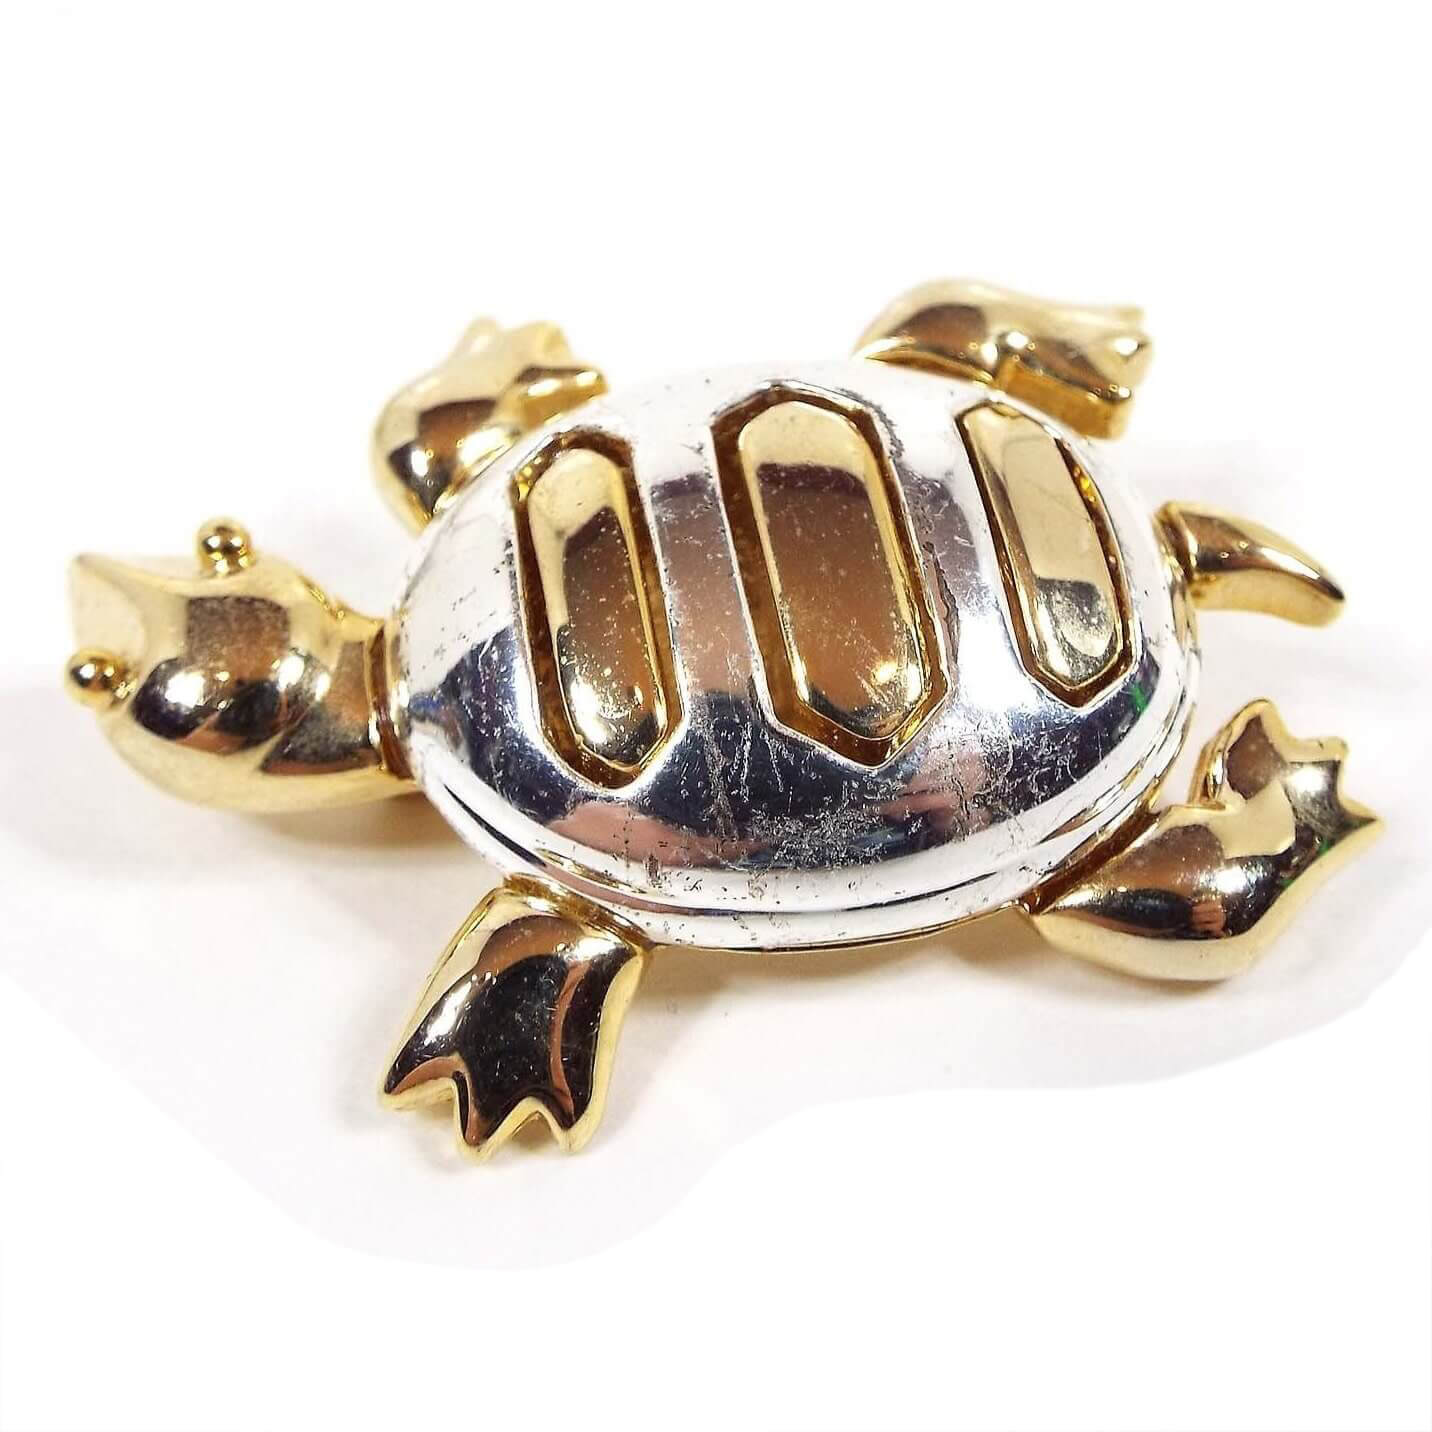 Top view of the Allison Reed retro vintage turtle brooch pin. The turtle appears to be on the move with his legs bent and his head turned to the right. His head, legs, tail, and stripes on top are gold tone in color and his shell is silver tone in color.